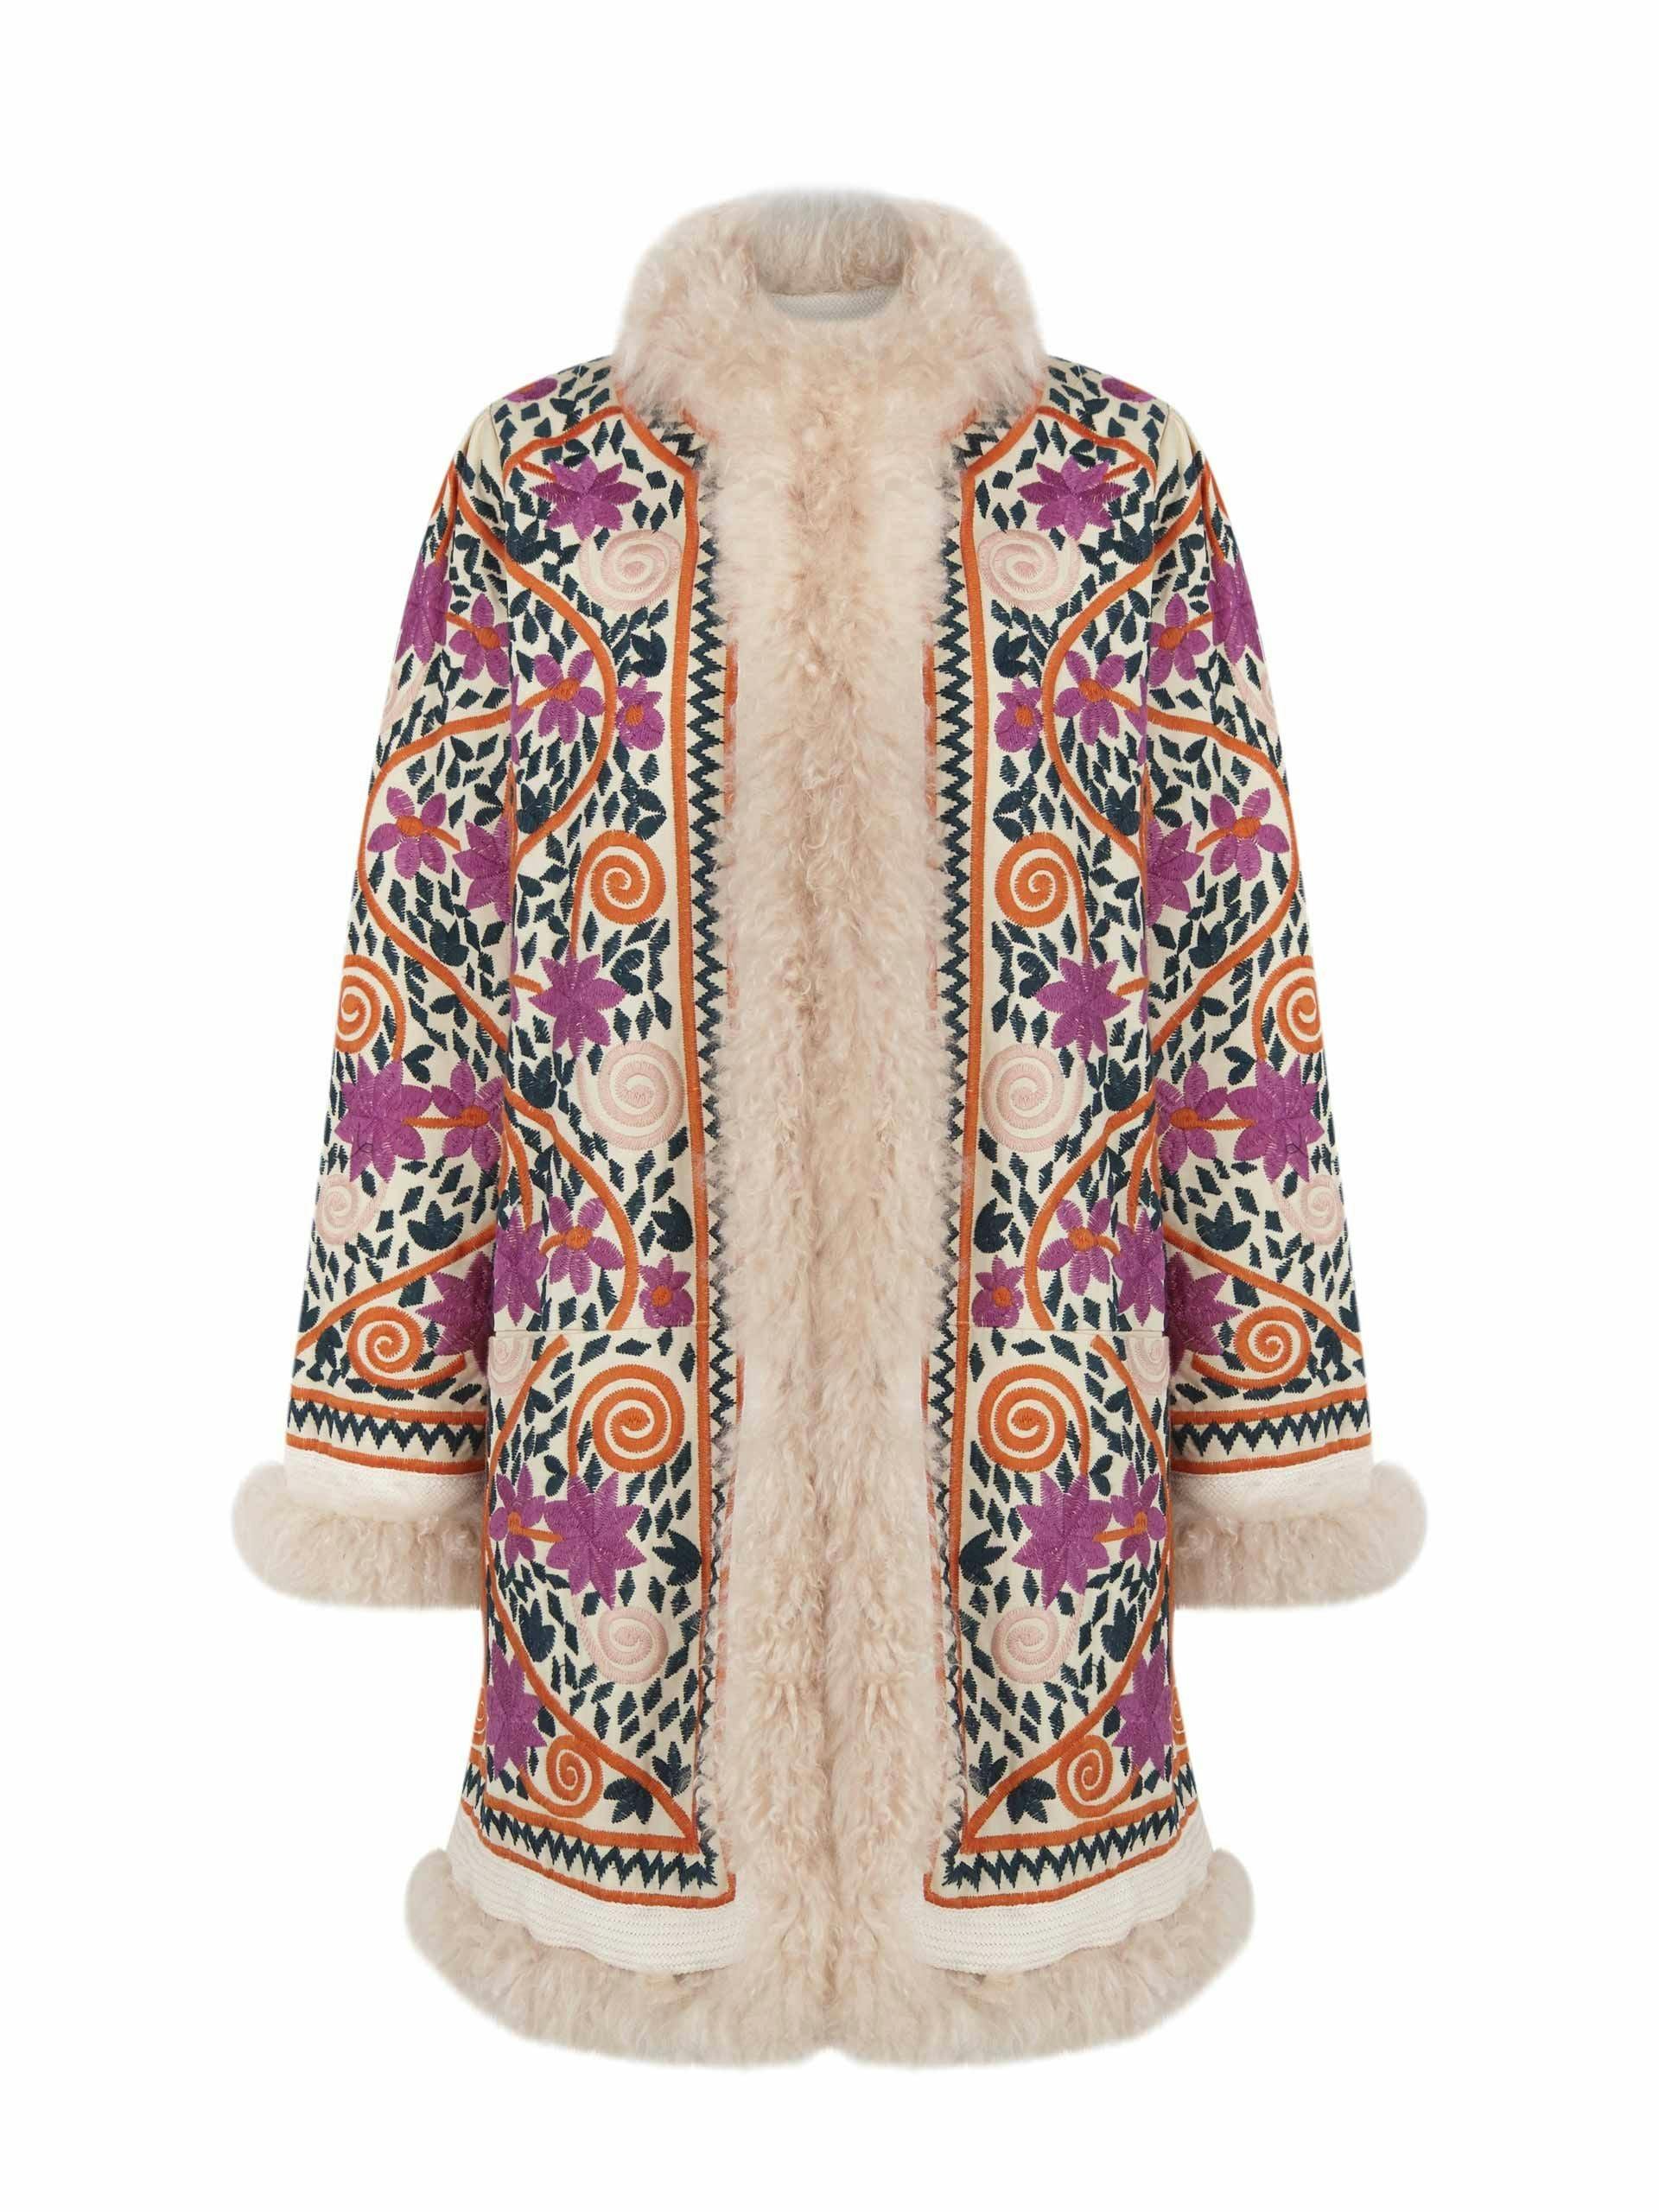 Embroidered coat with faux fur lining